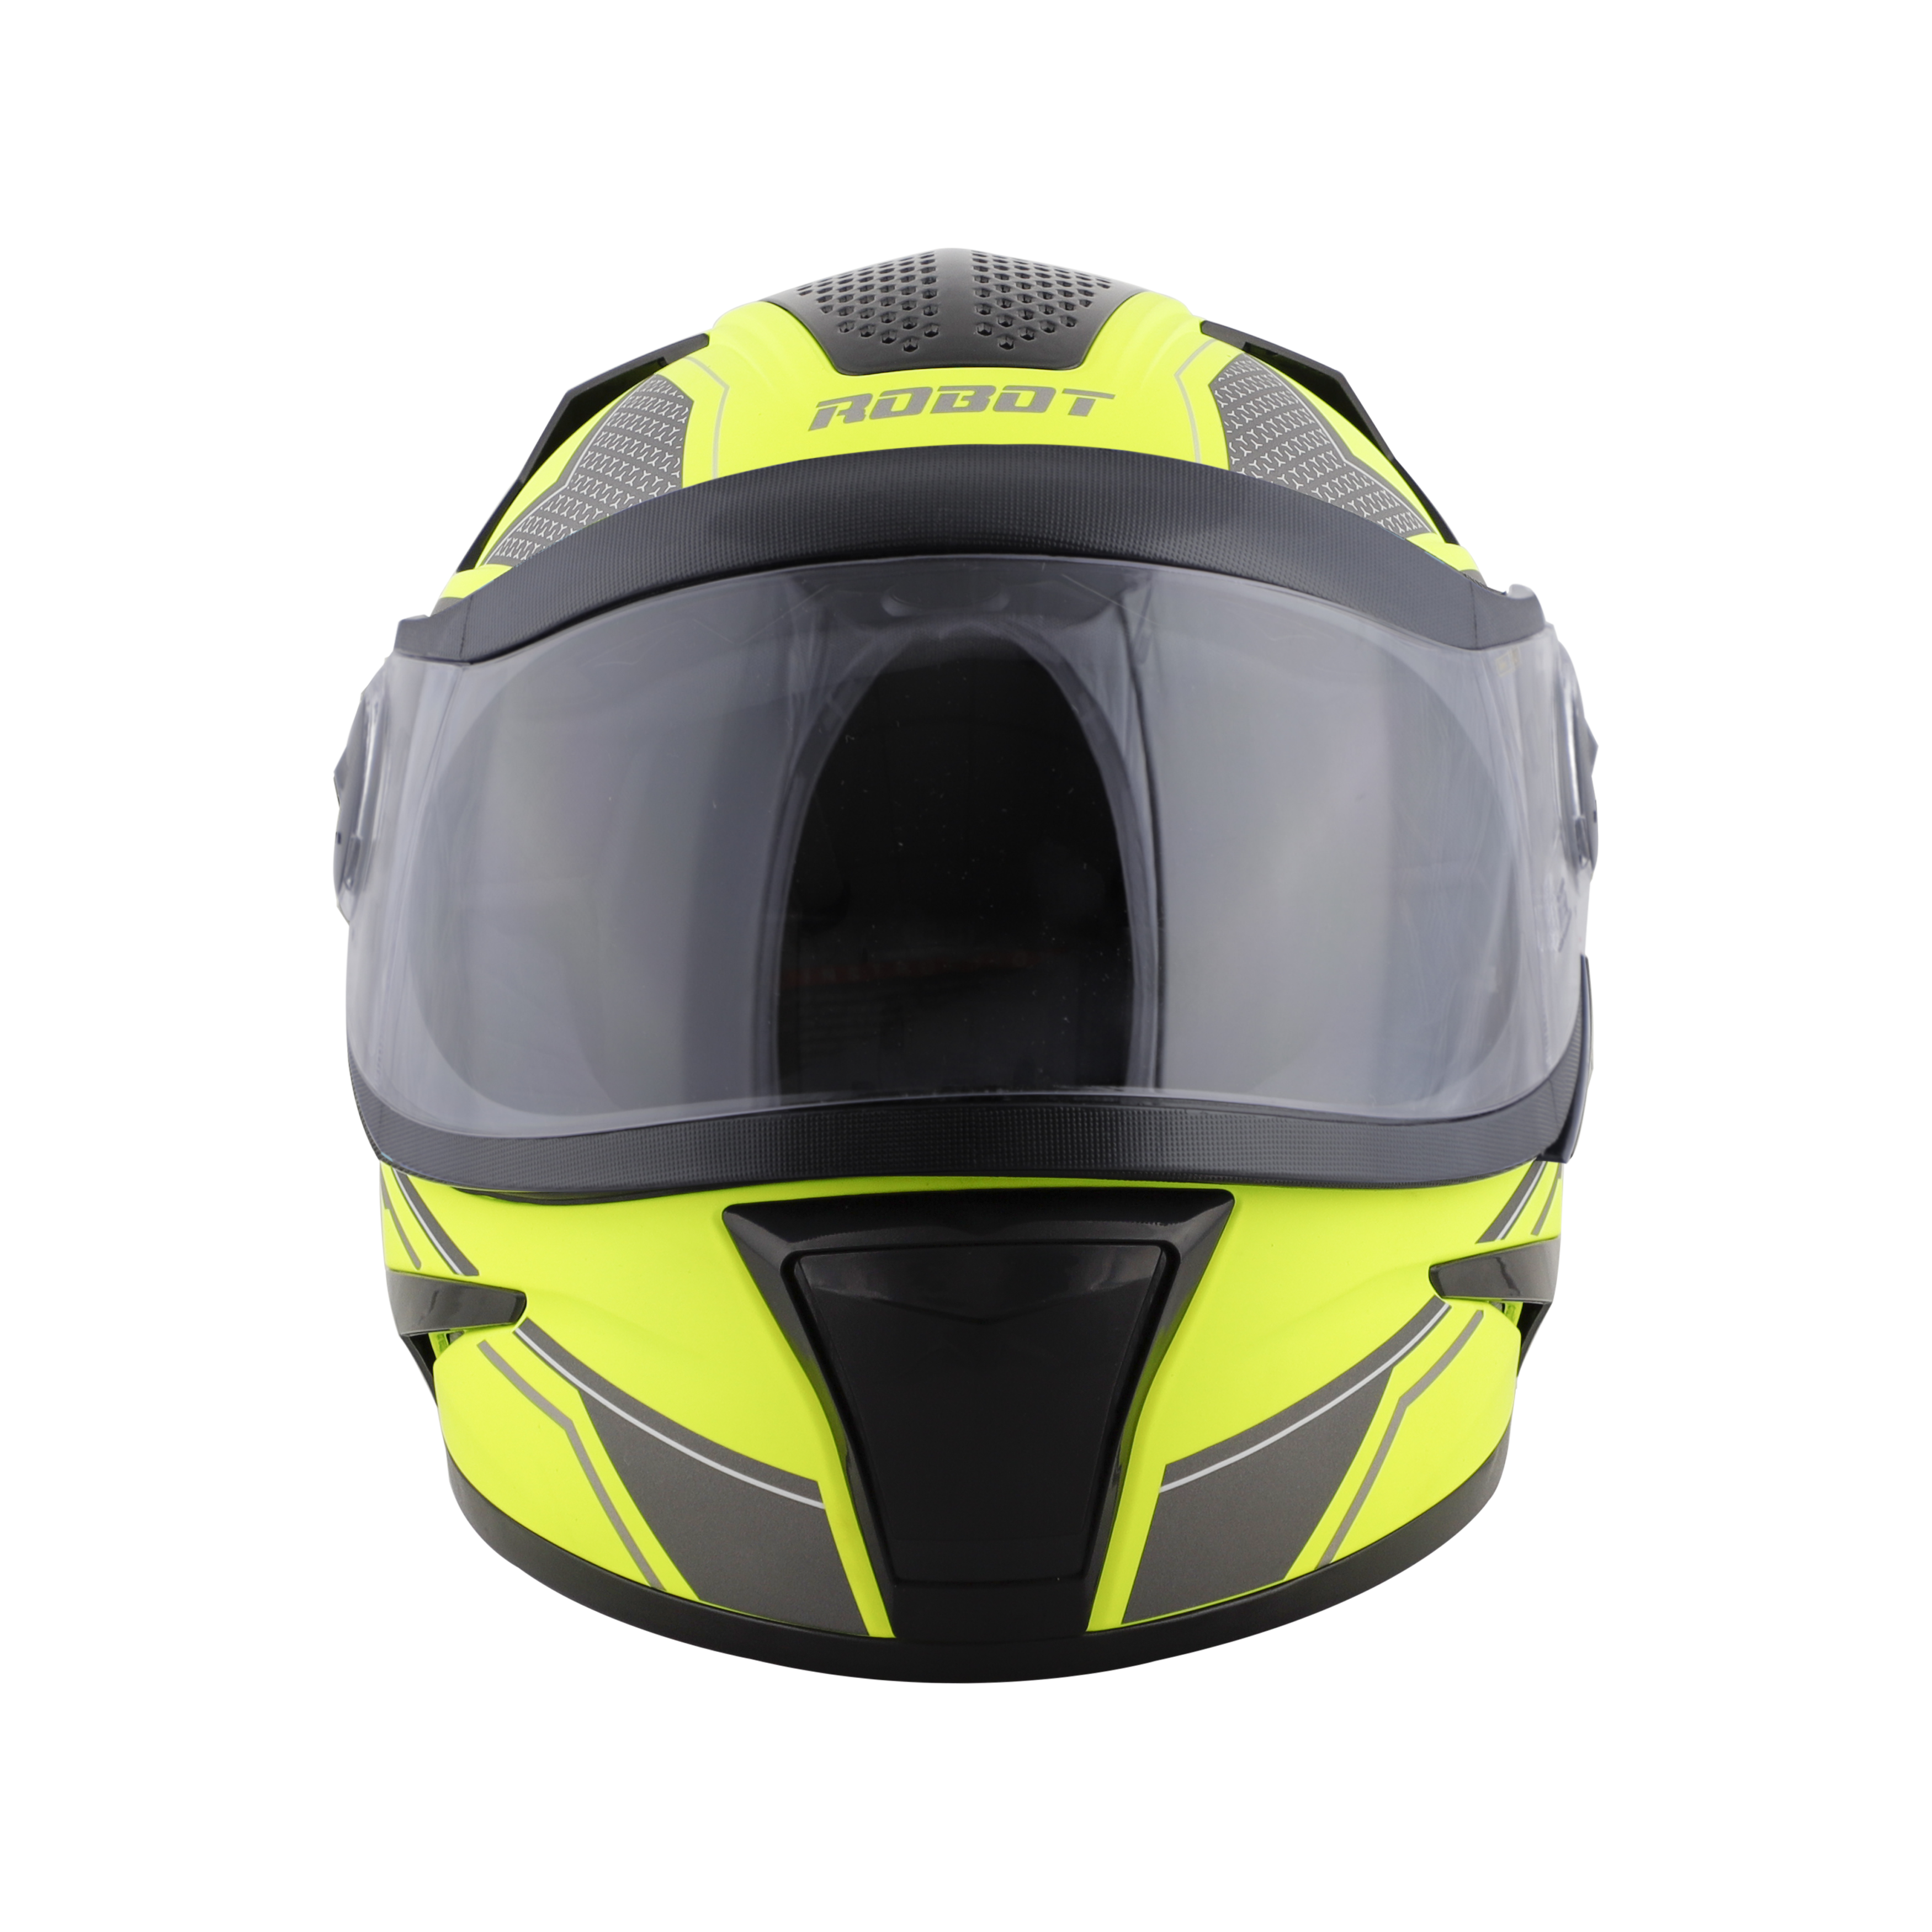 Steelbird SBH-17 Thriller ISI Certified Full Face Graphic Helmet (Glossy Fluo Neon Grey With Clear Visor)